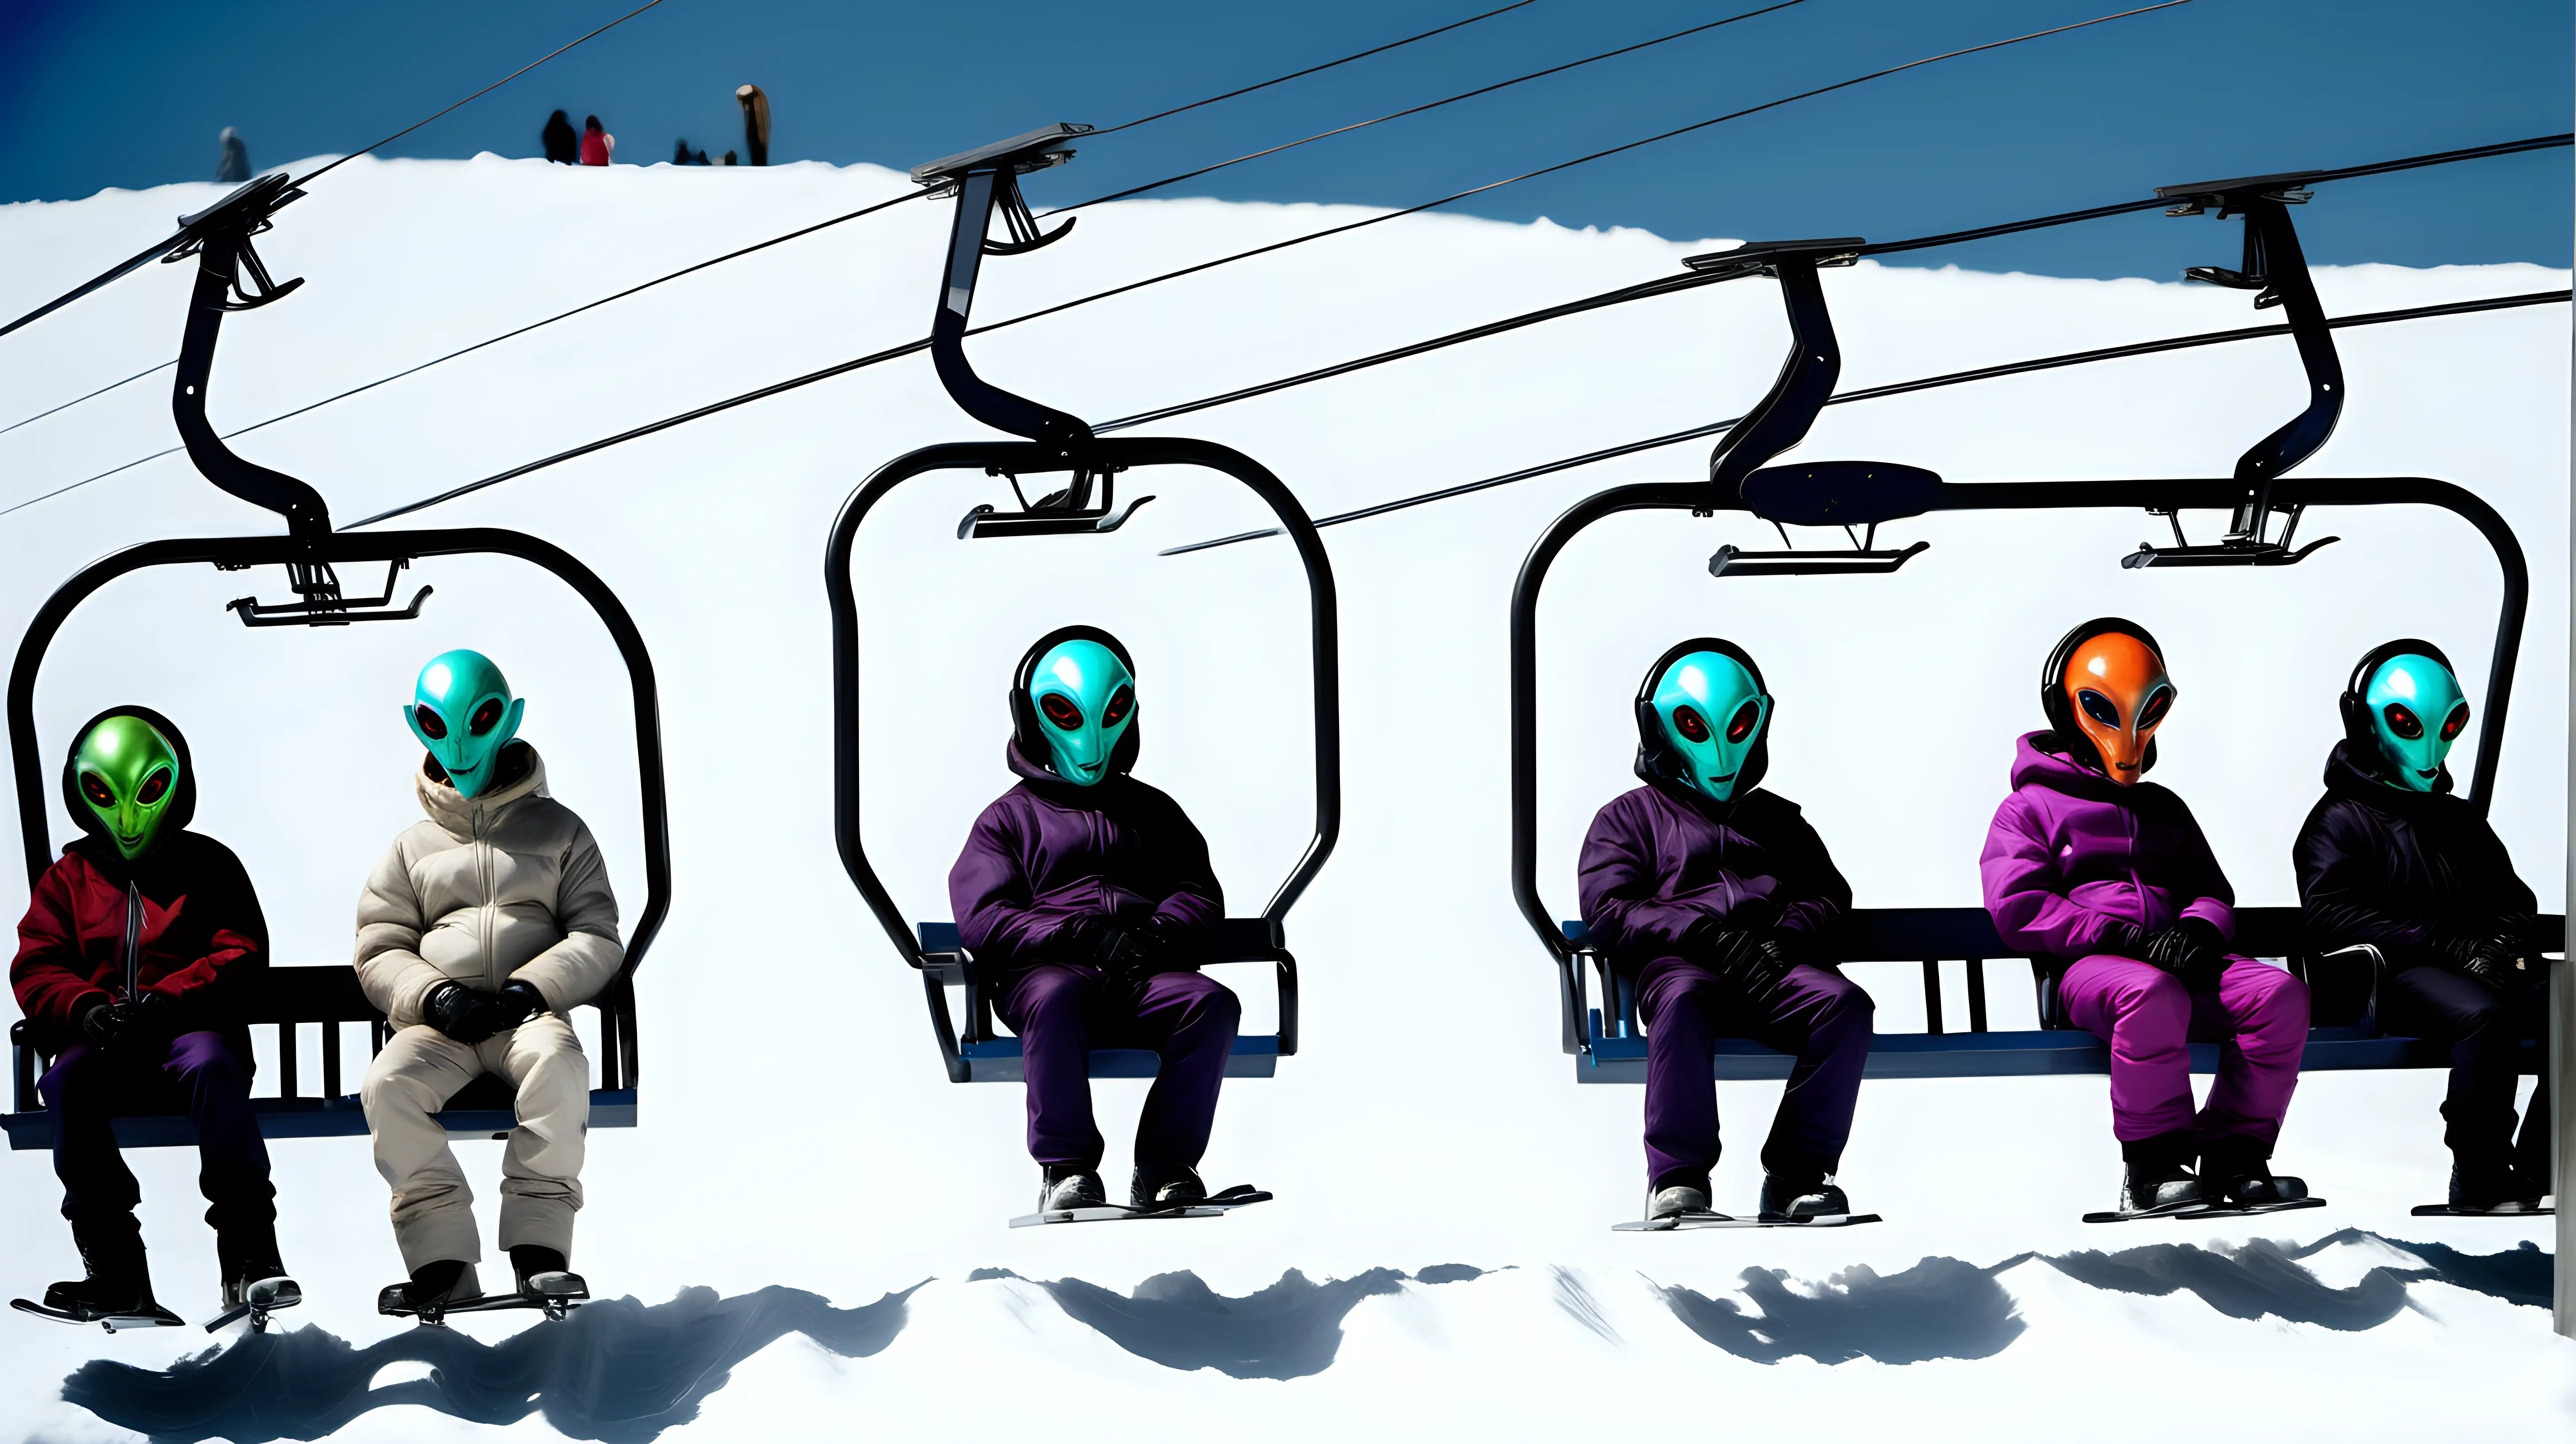 Extraterrestrial Queue at Chairlift Alien Visitors Awaiting Lift